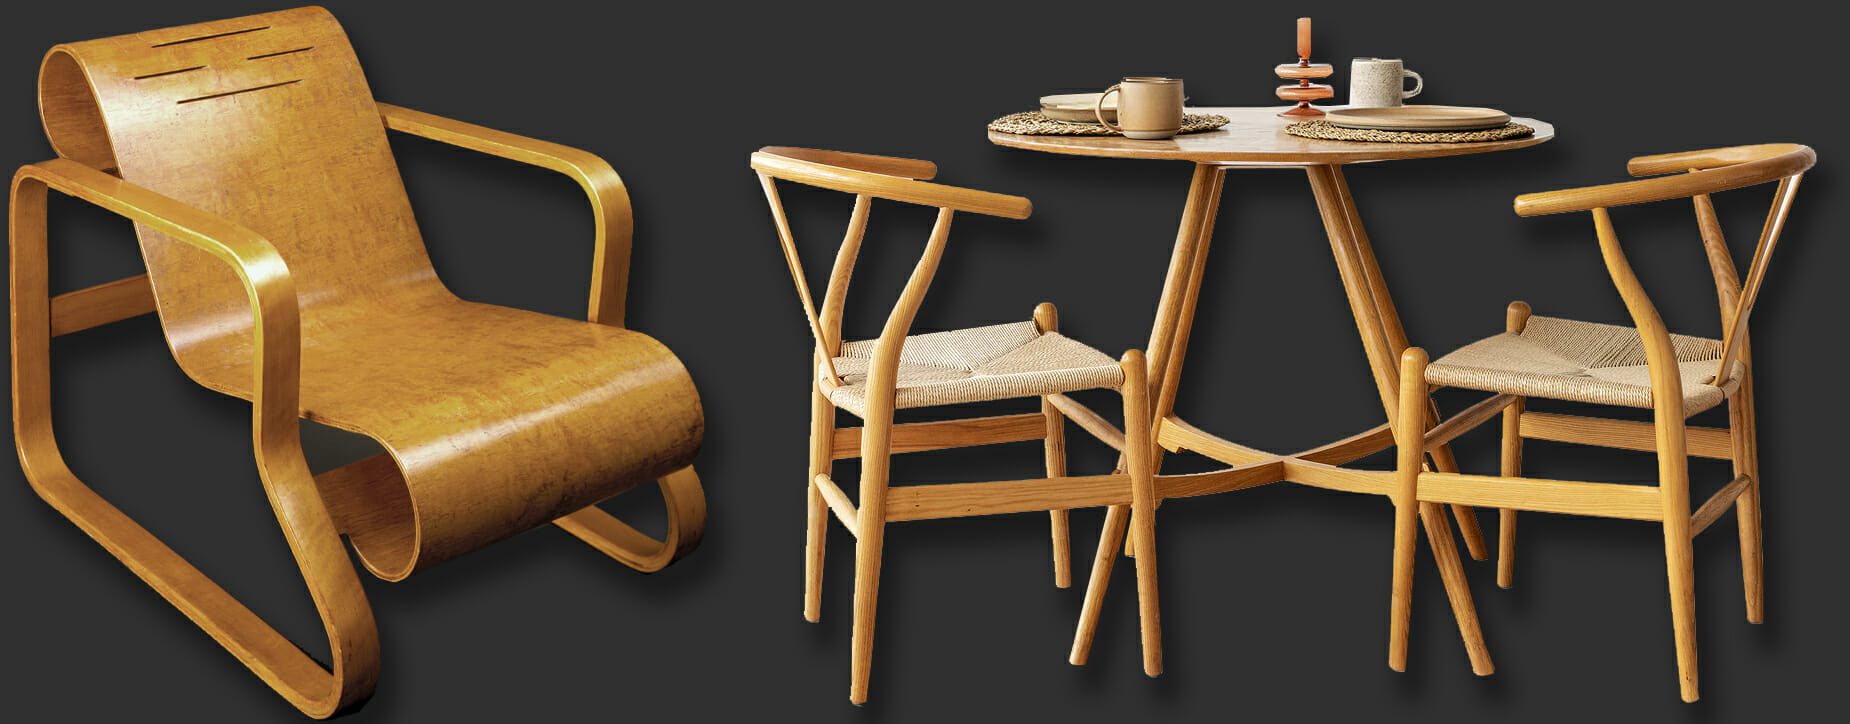 Mid-century modern furniture examples